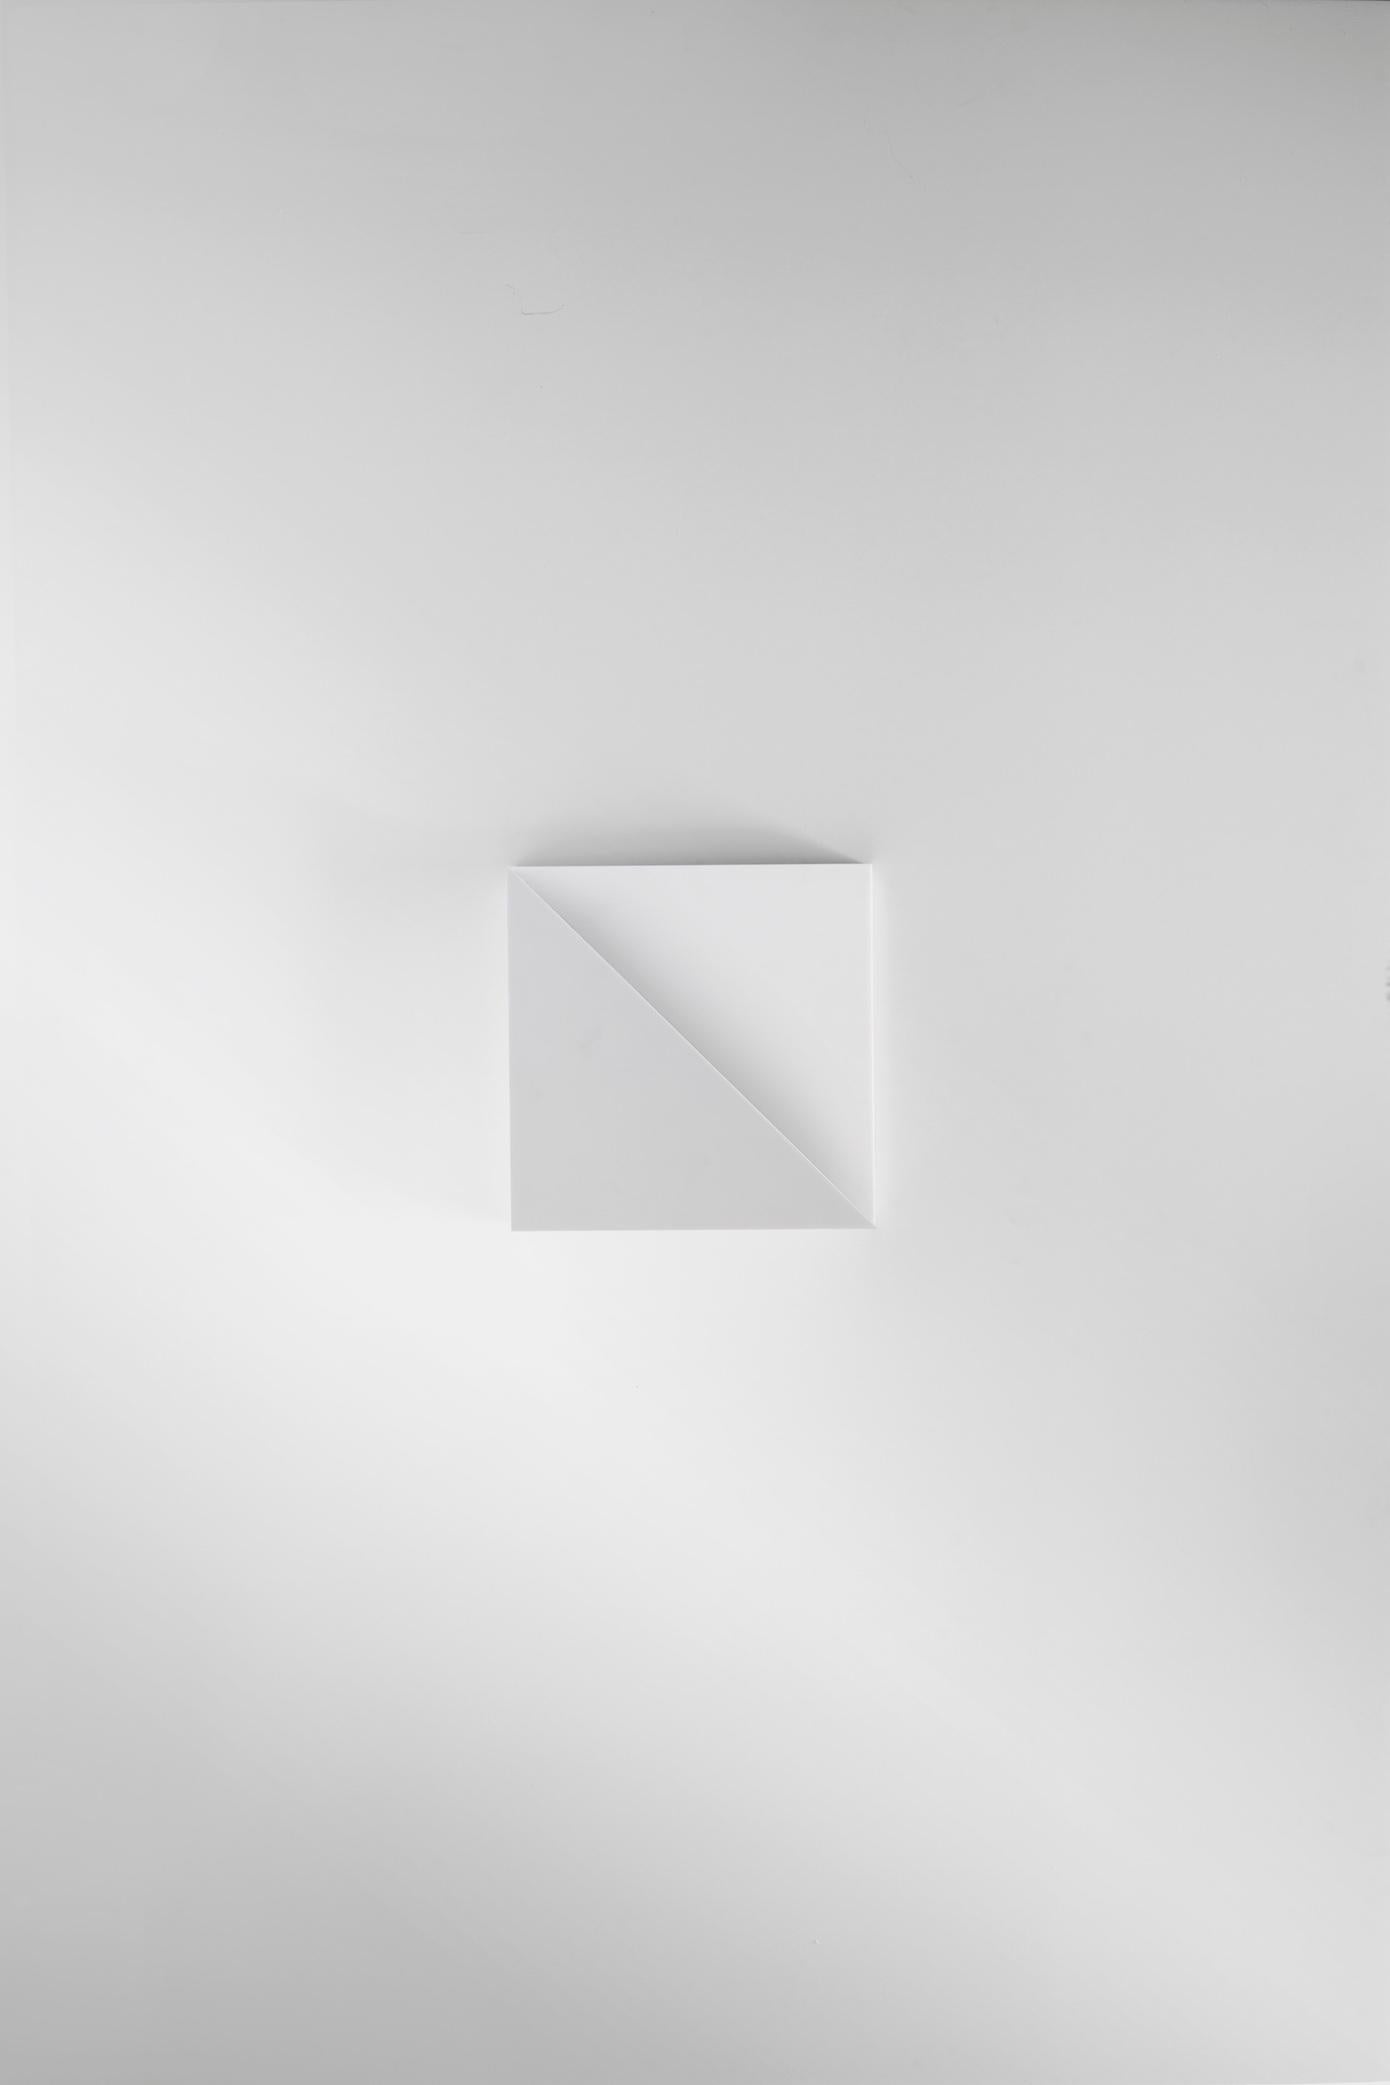 Part of the Cycladic Series, exploring the power of architecture brought to small scale. The Square sconce illuminates the purity, symbolism and intimate power of the square and triangle: two of the most emblematic, elemental geometric forms